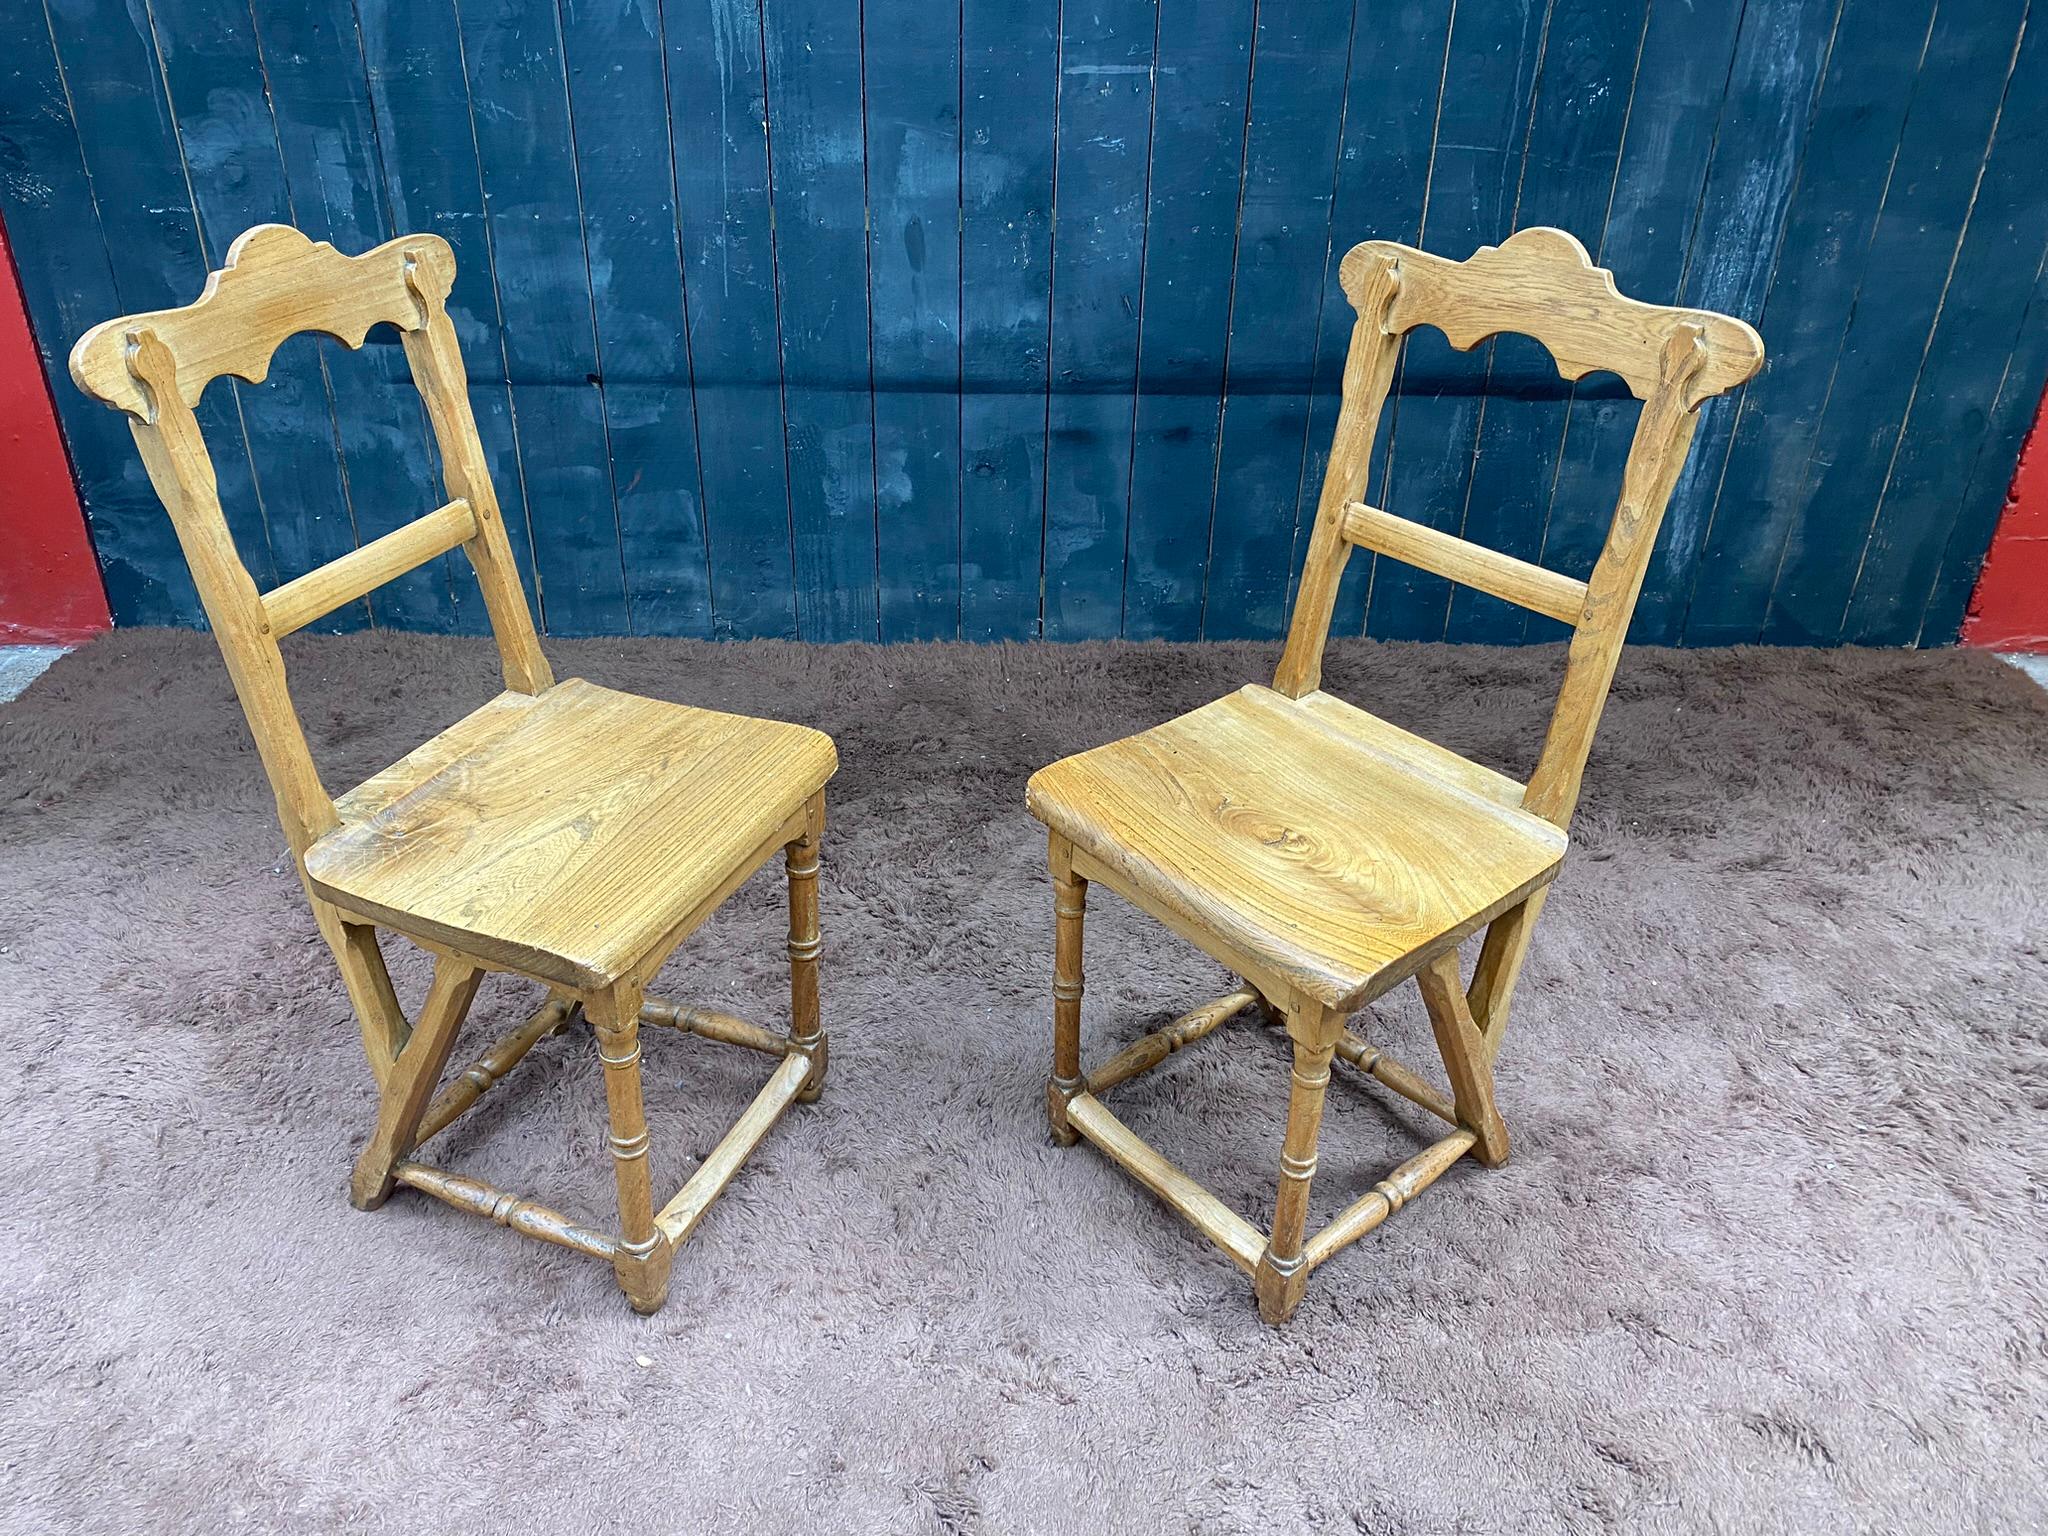 6 Mountain Chairs, in ELM, circa 1900 For Sale 3